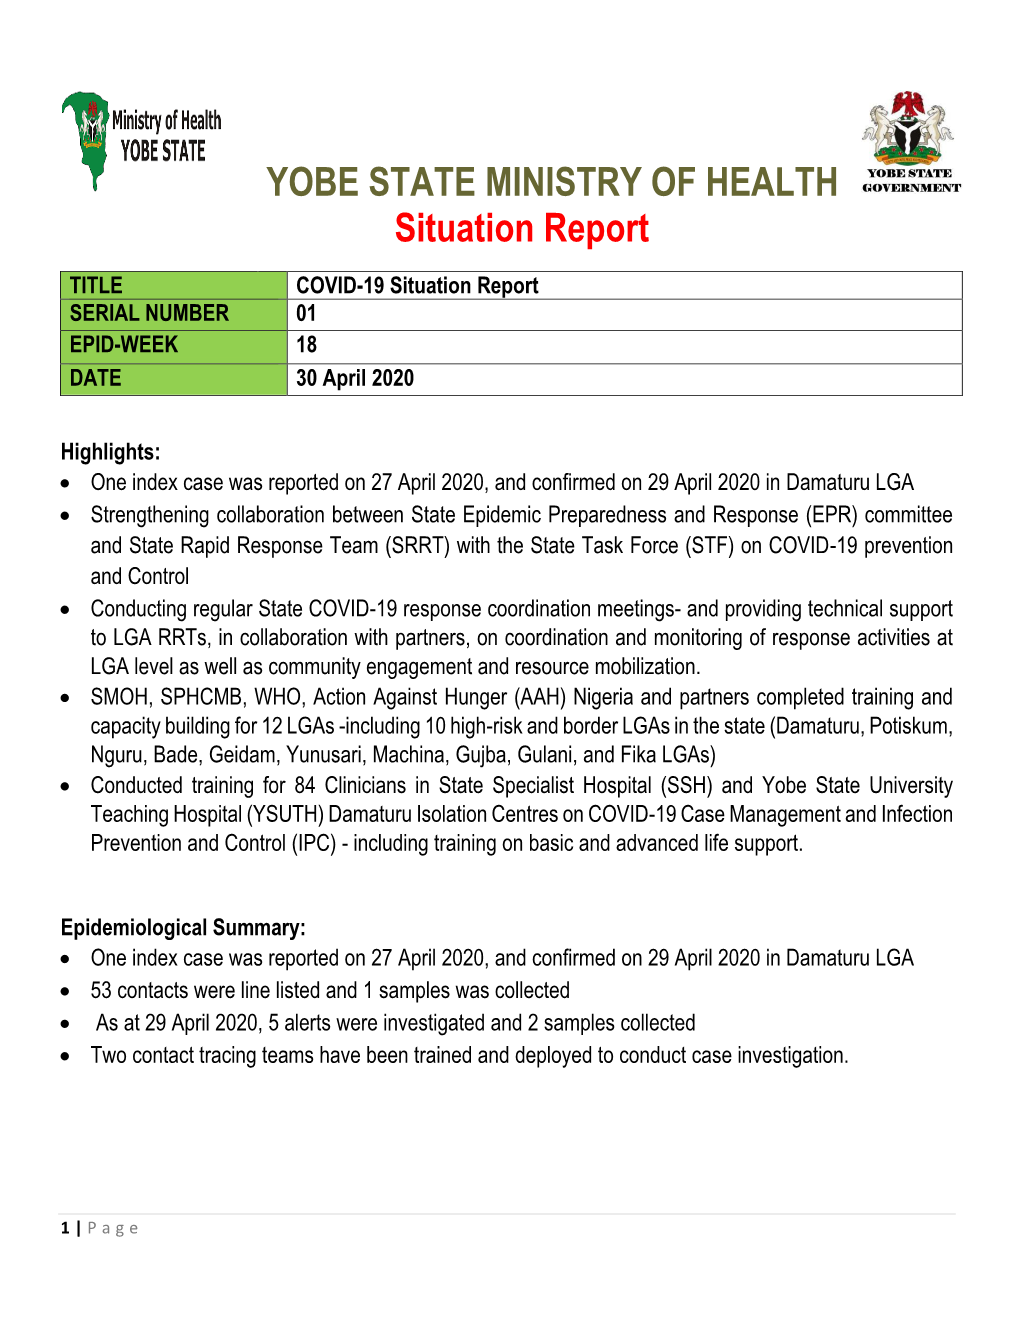 YOBE STATE MINISTRY of HEALTH Situation Report